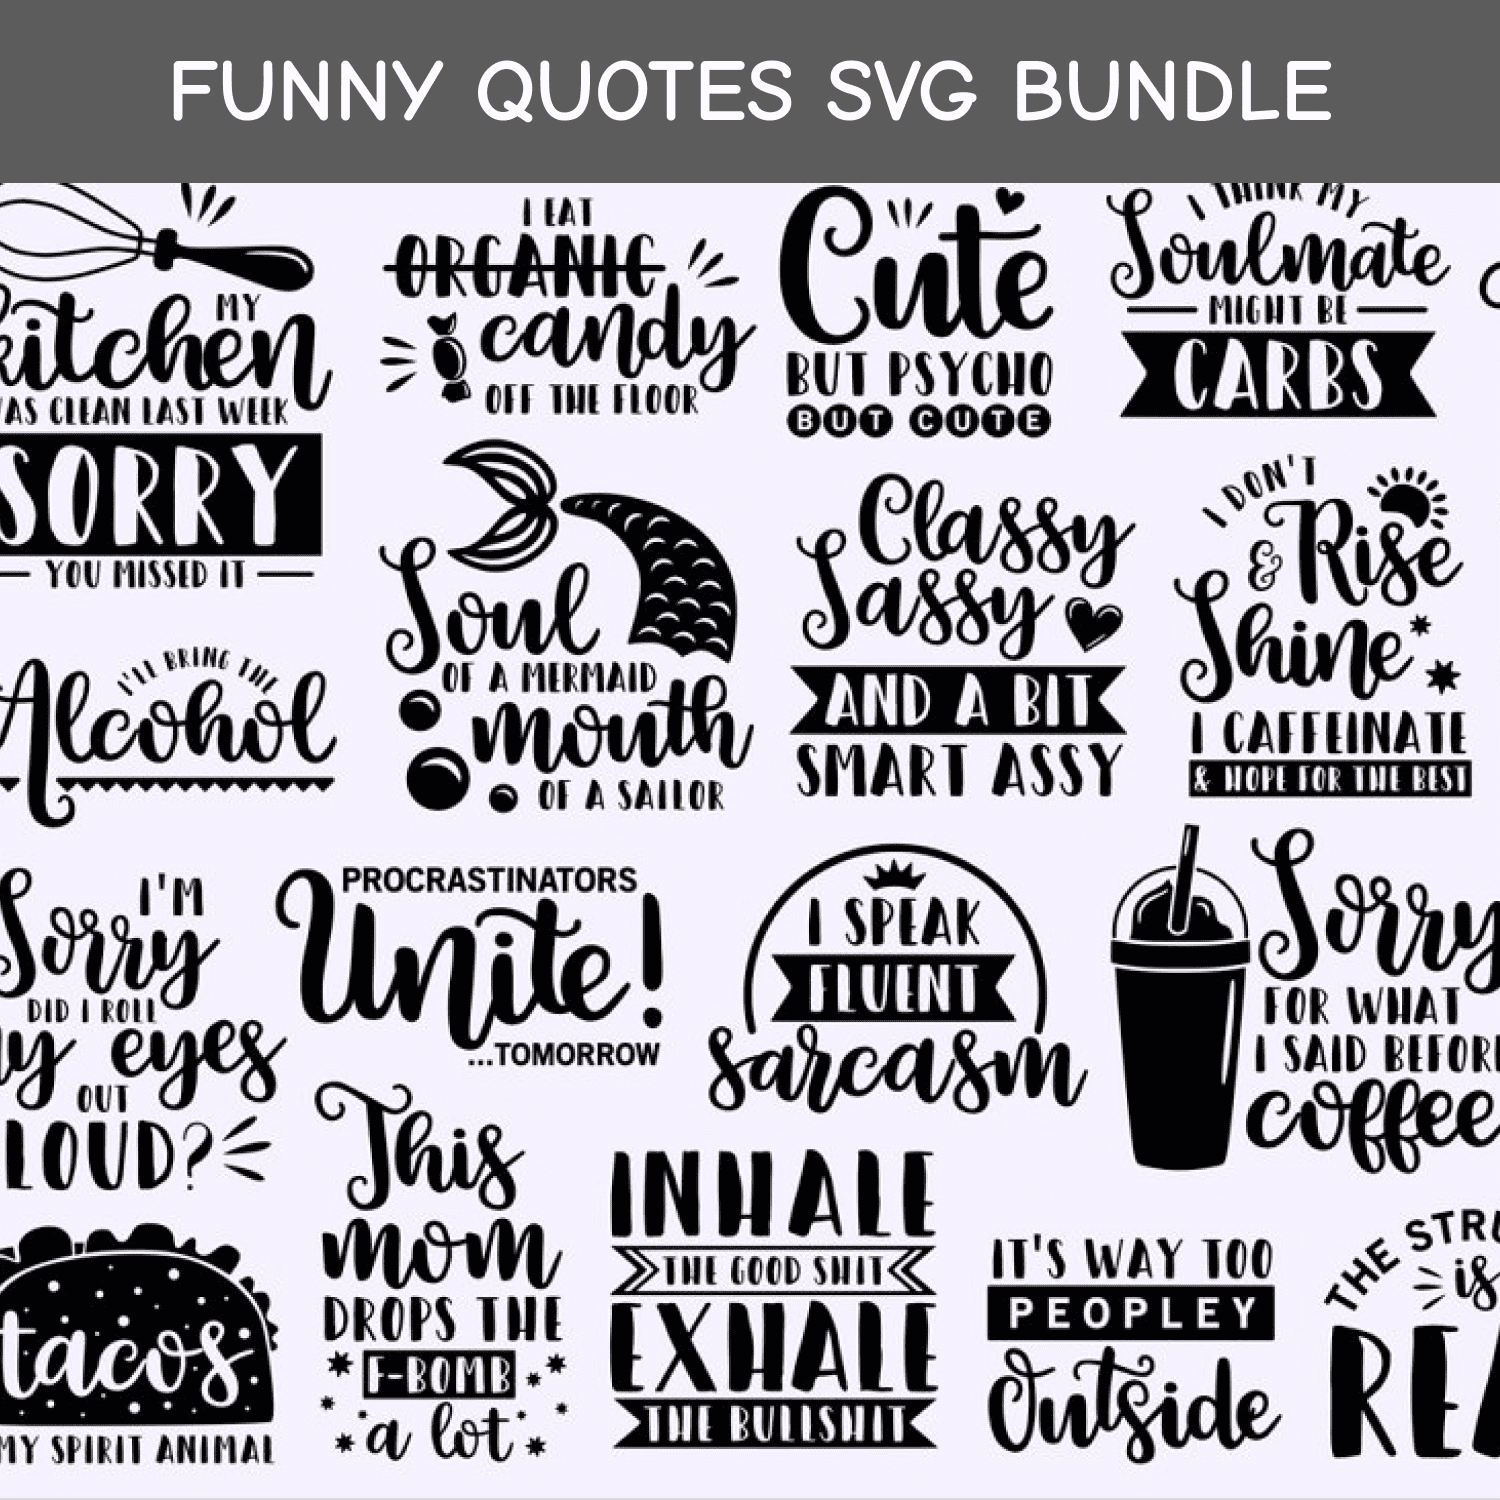 Funny quotes SVG Bundle cover.